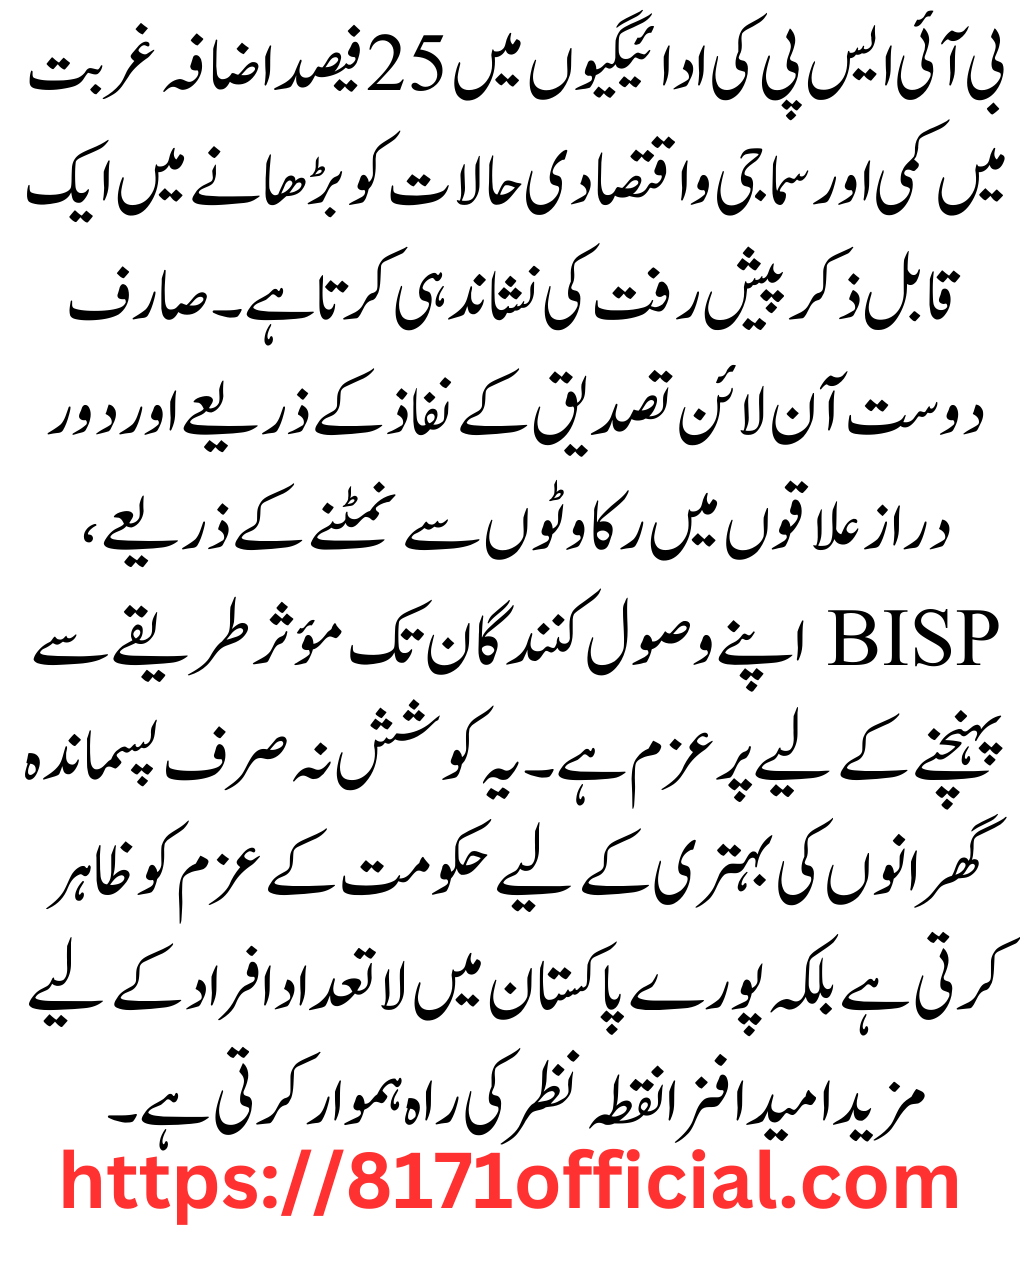 BISP New Payment Increased by 25%: Latest Update on BISP Payment